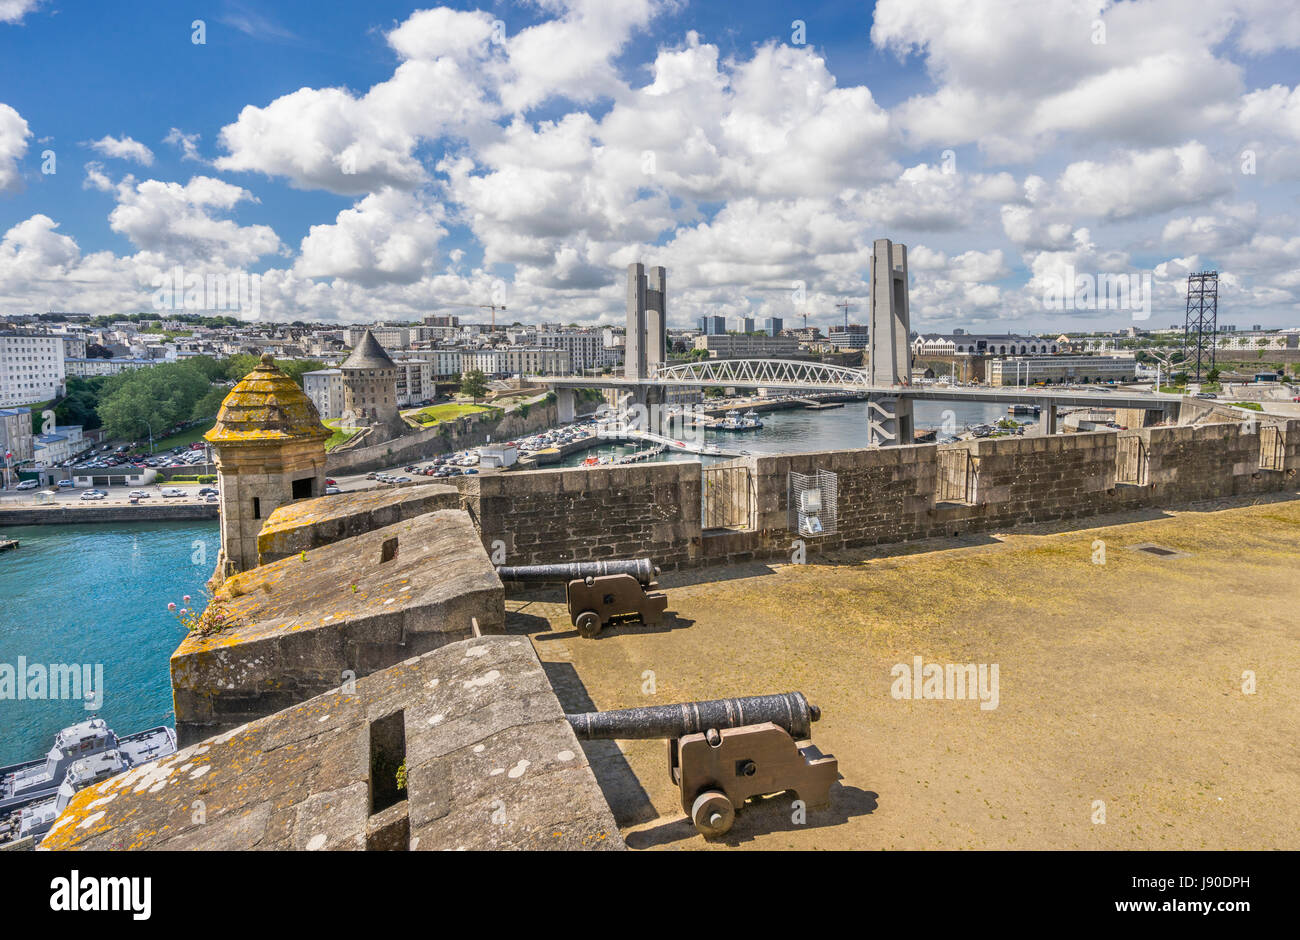 France, Brittany, Finistére department, Brest, the battlements of Chateau de Brest with view of  the Recouverance bridge Stock Photo